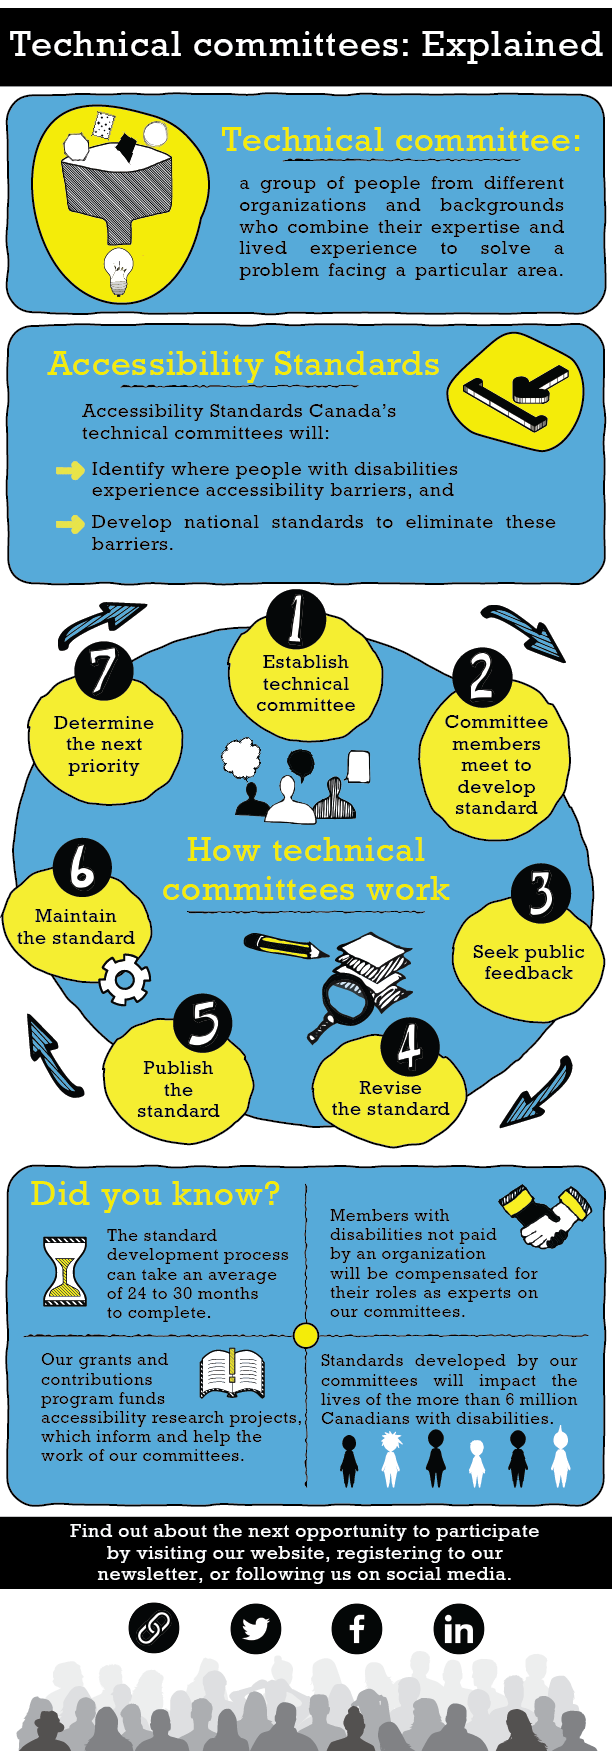 This infographic describes what is a technical committee, how it works, and provides quick facts about Accessibility Standards Canada's technical committees. The full text is available below, on this page.